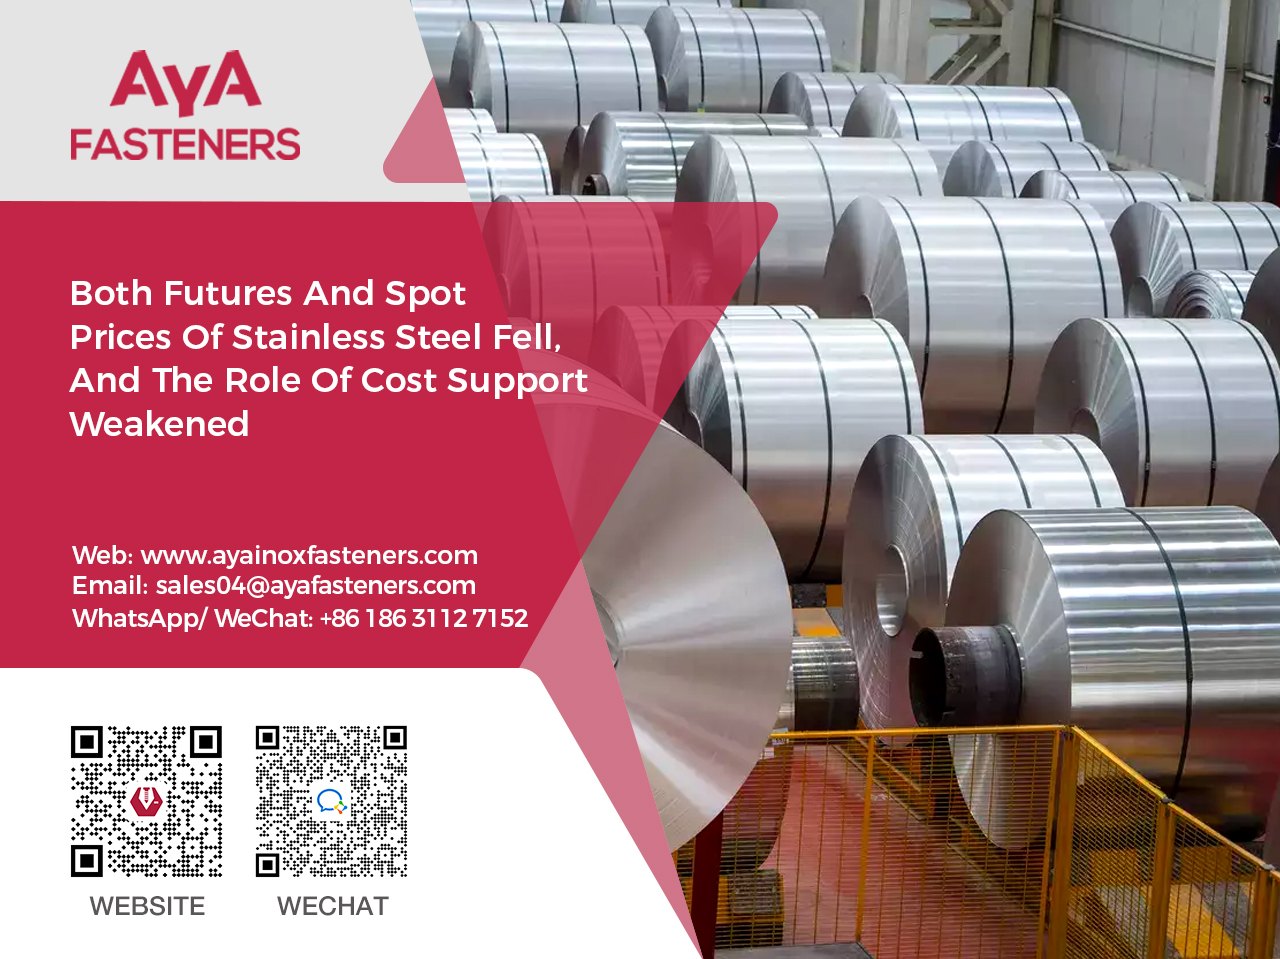 Both Futures And Spot Prices Of Stainless Steel Fell, And The Role Of Cost Support Weakened